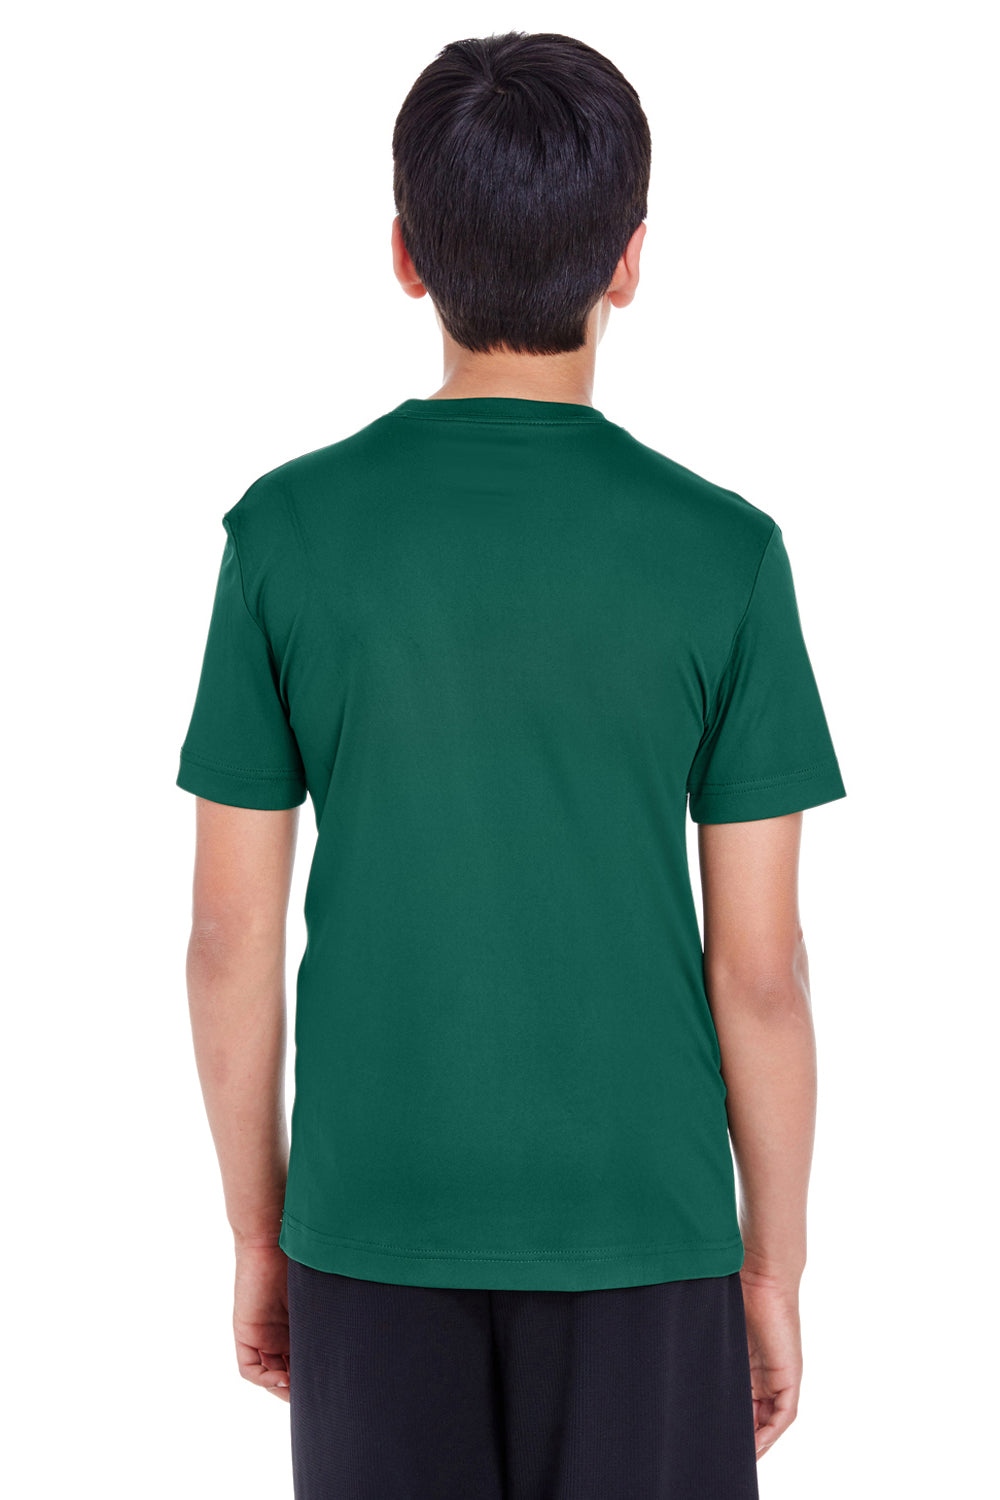 Team 365 TT11Y Youth Zone Performance Moisture Wicking Short Sleeve Crewneck T-Shirt Forest Green Back